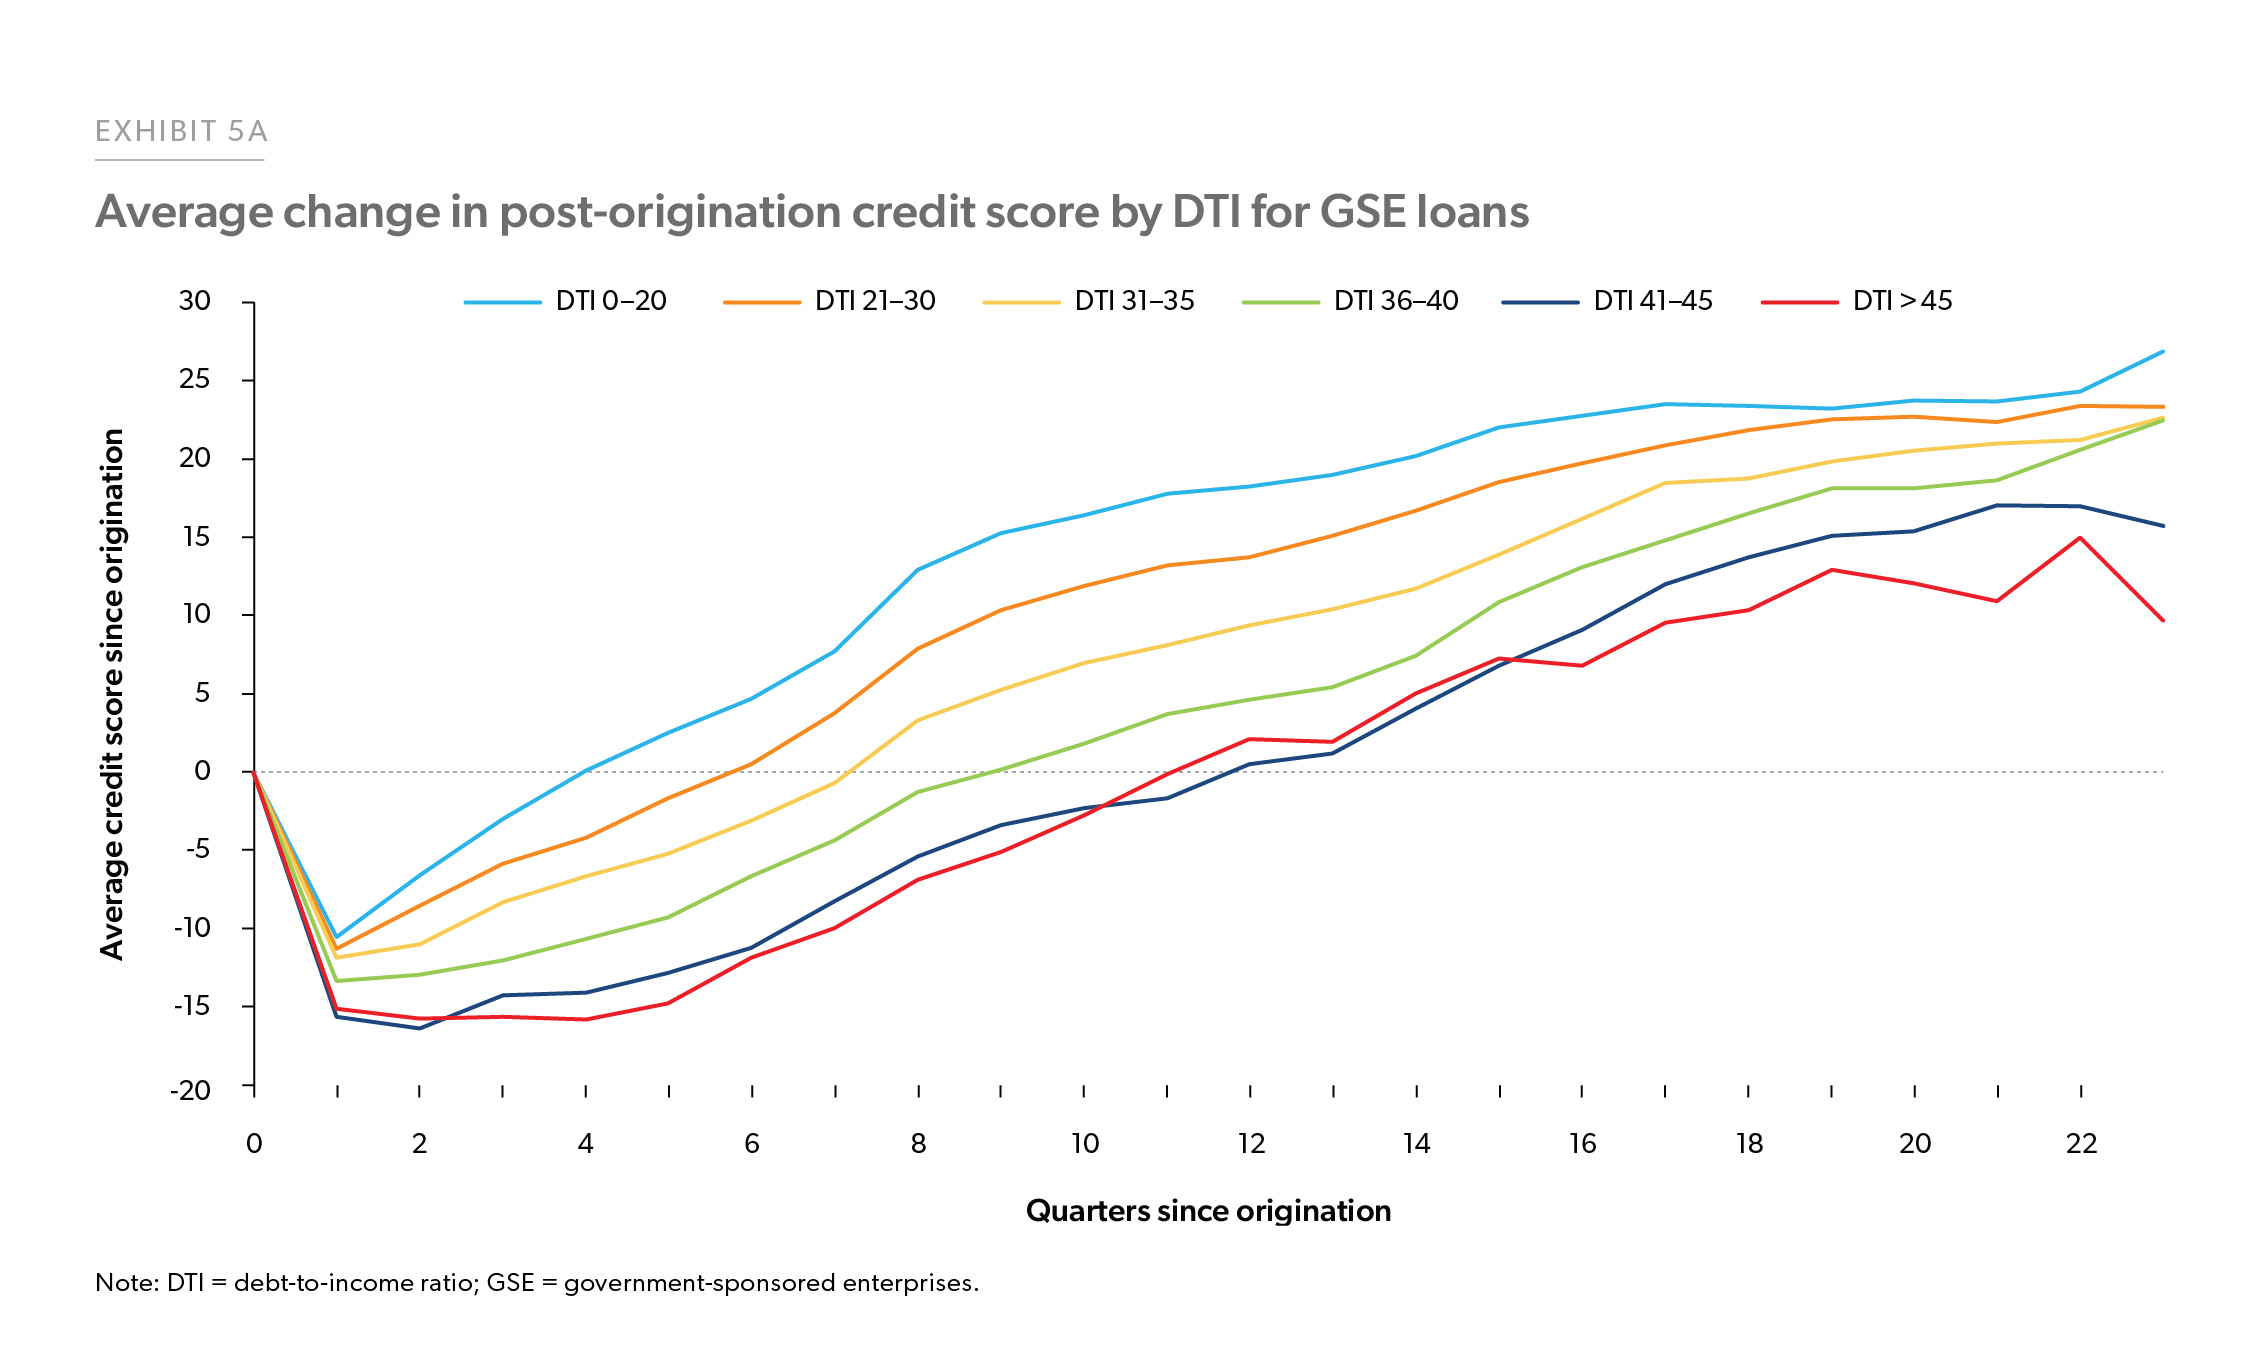 Exhibit 5A: Average change in post-origination credit score by DTI for GSE loans